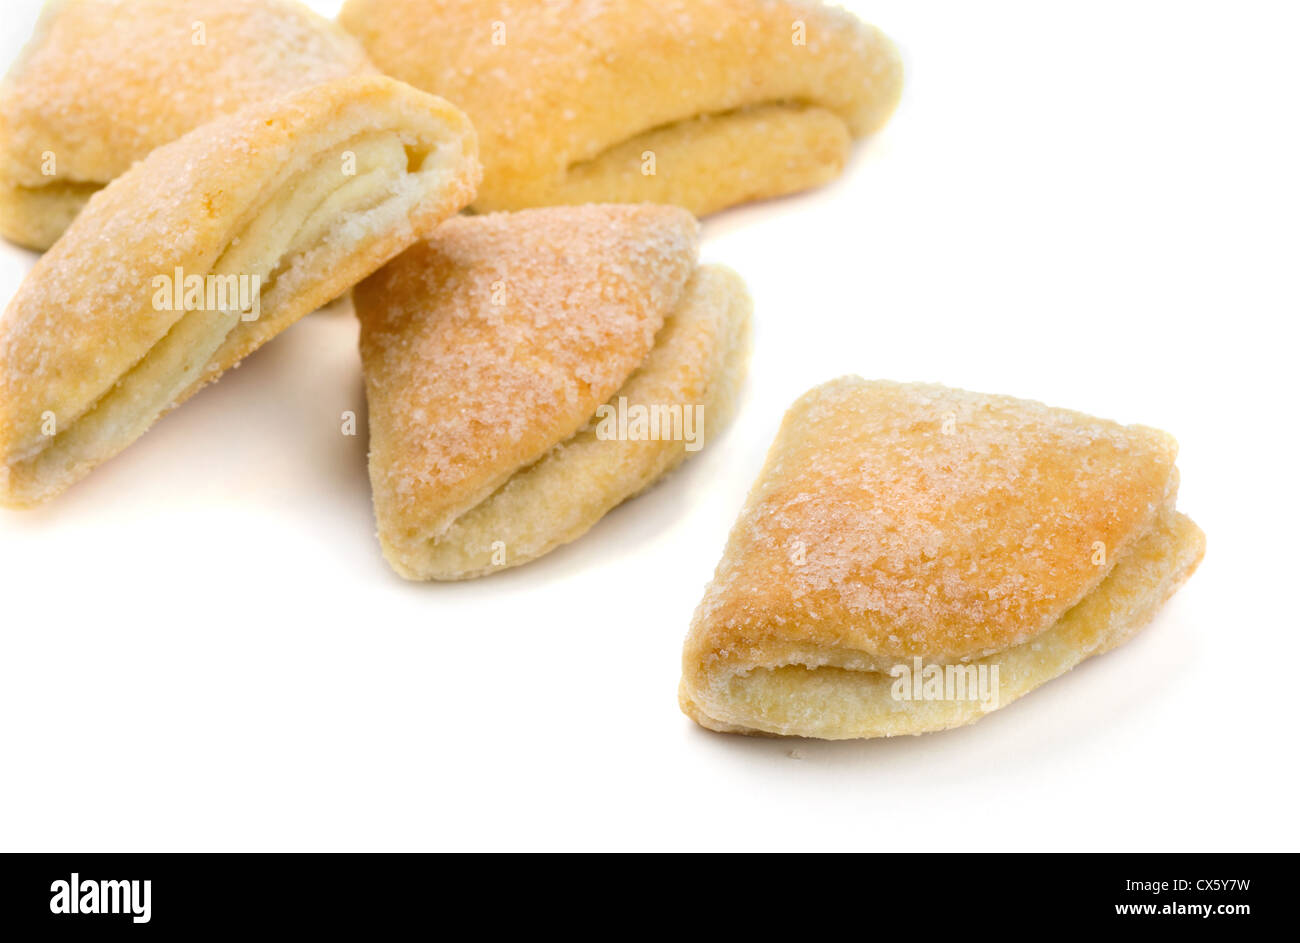 Des biscuits au fromage fait maison isolated on white Banque D'Images